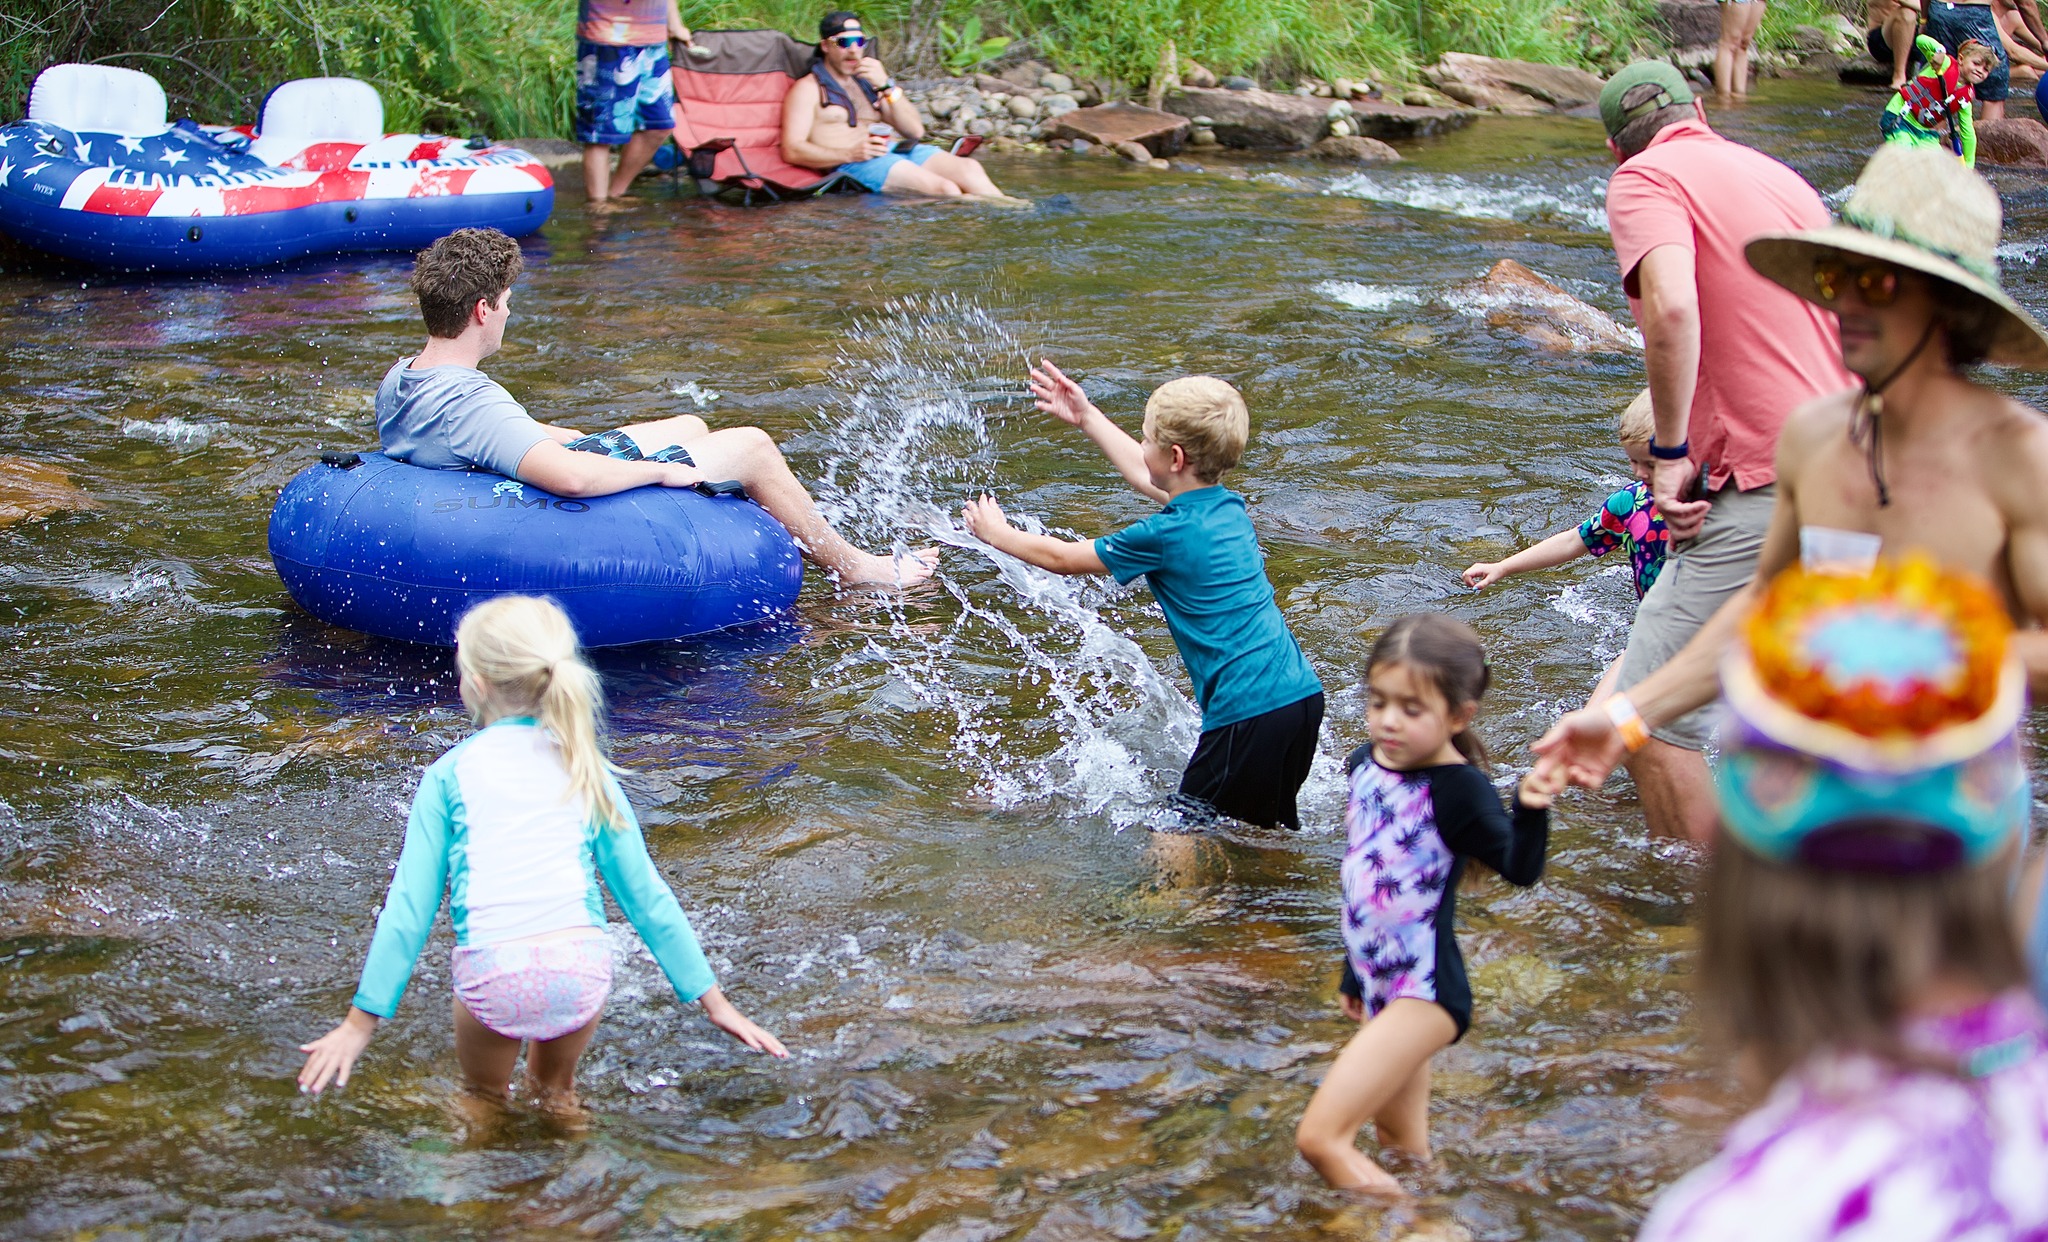 Playing in the river at RockyGrass